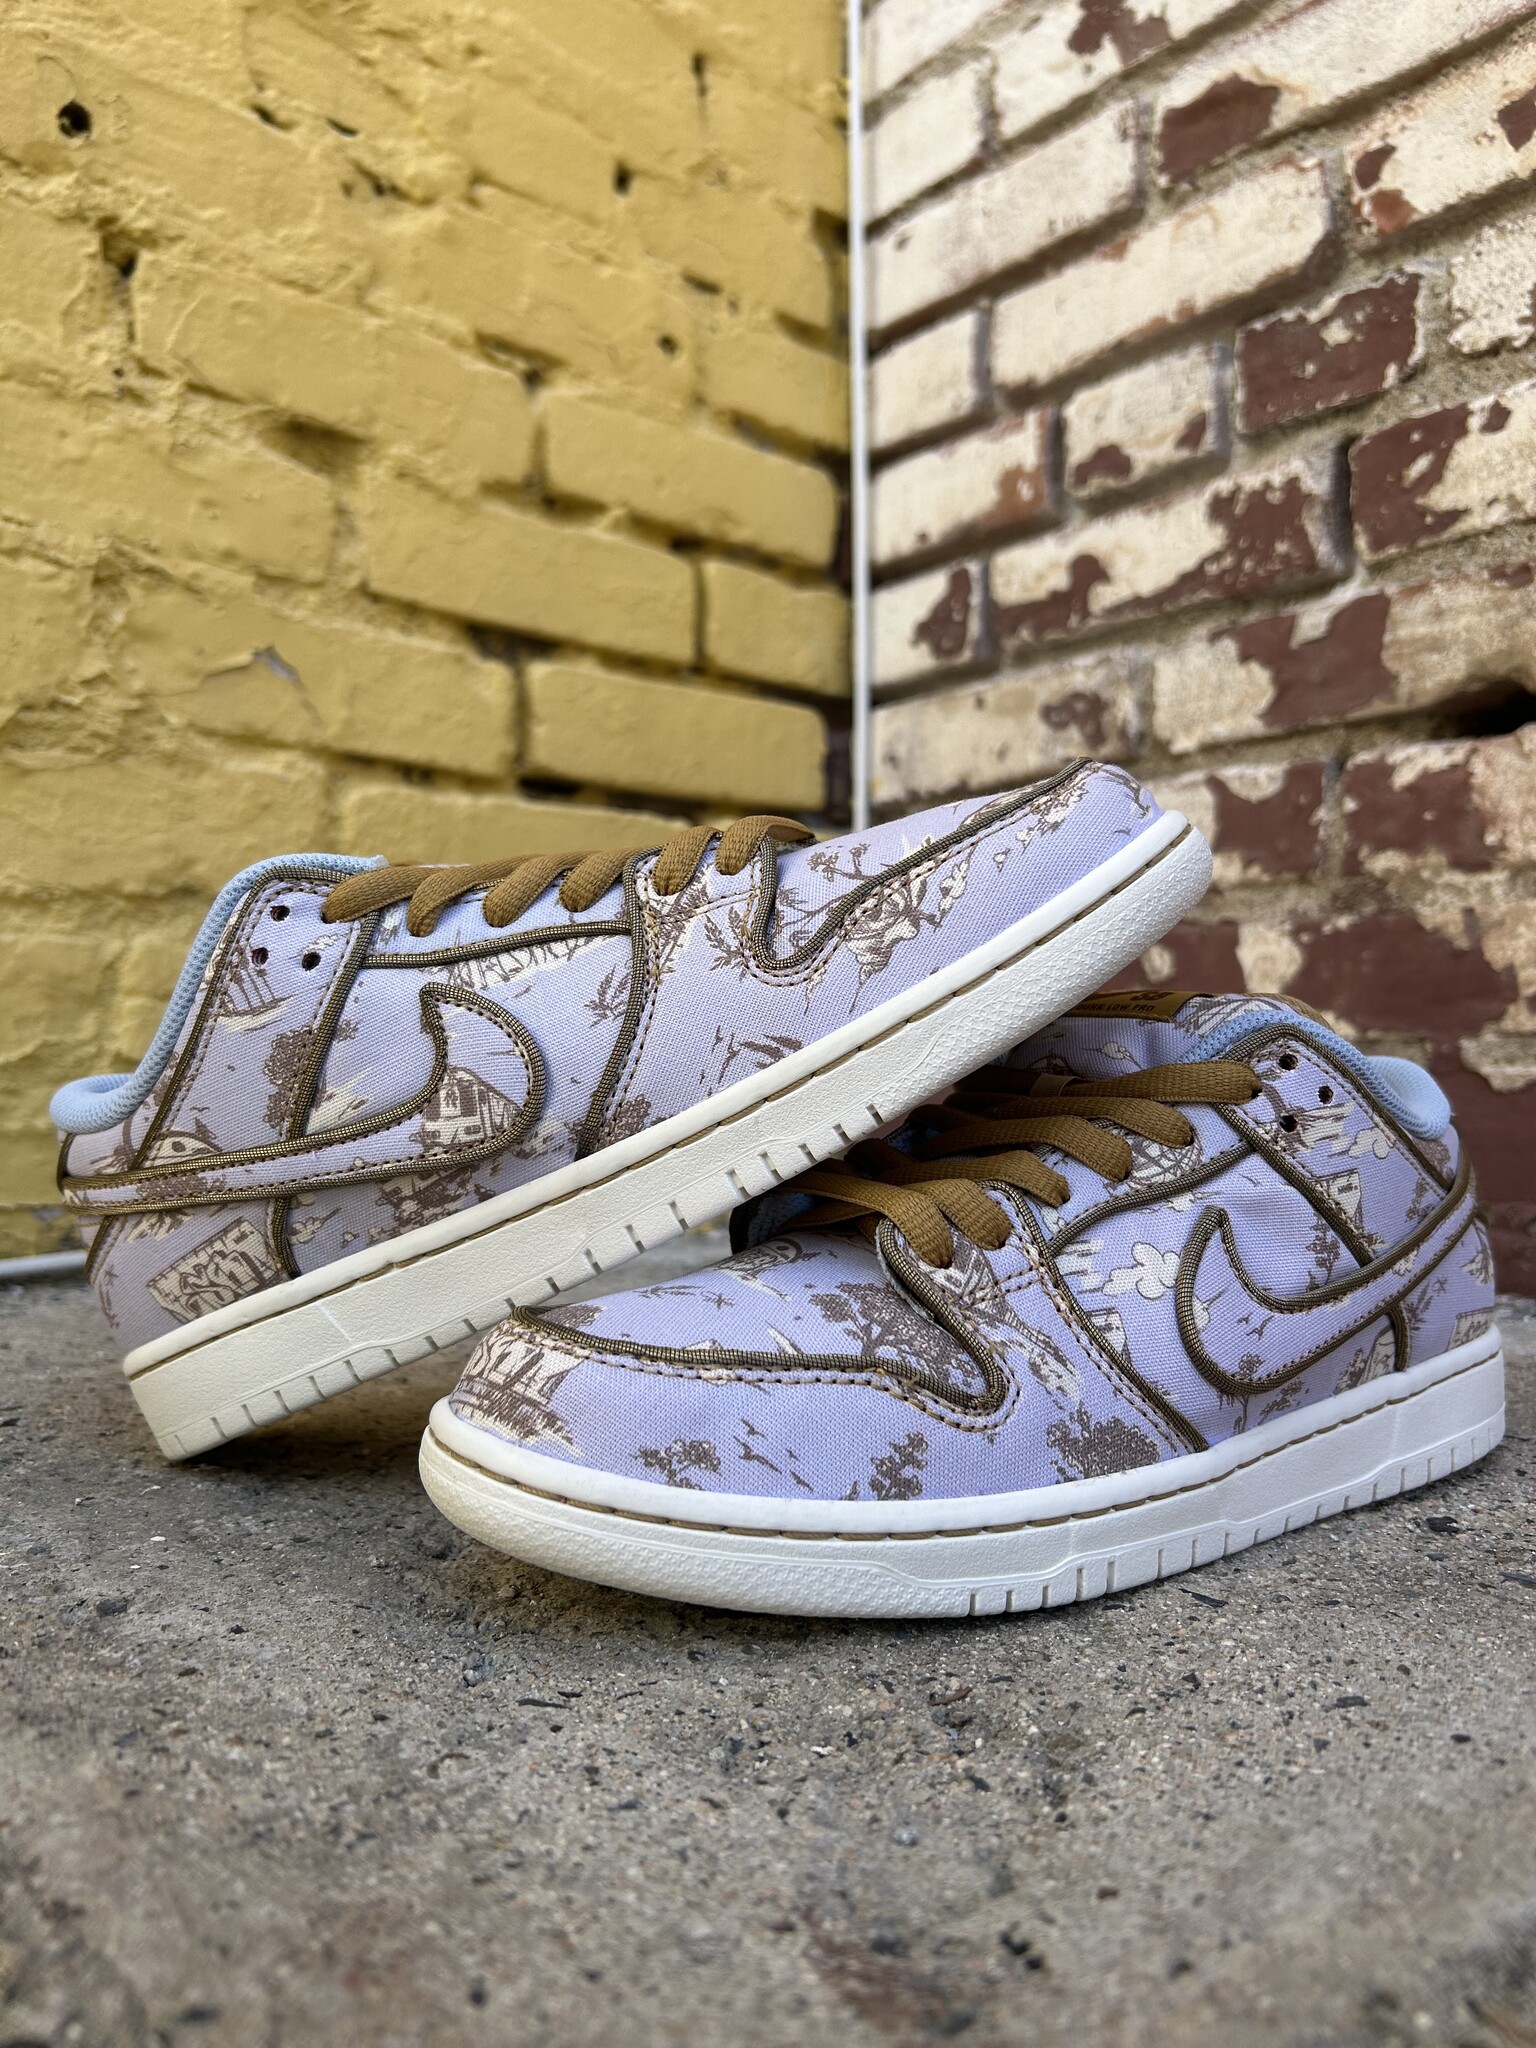 THE NIKE SB "CITY OF STYLE" DUNK LOW RAFFLE